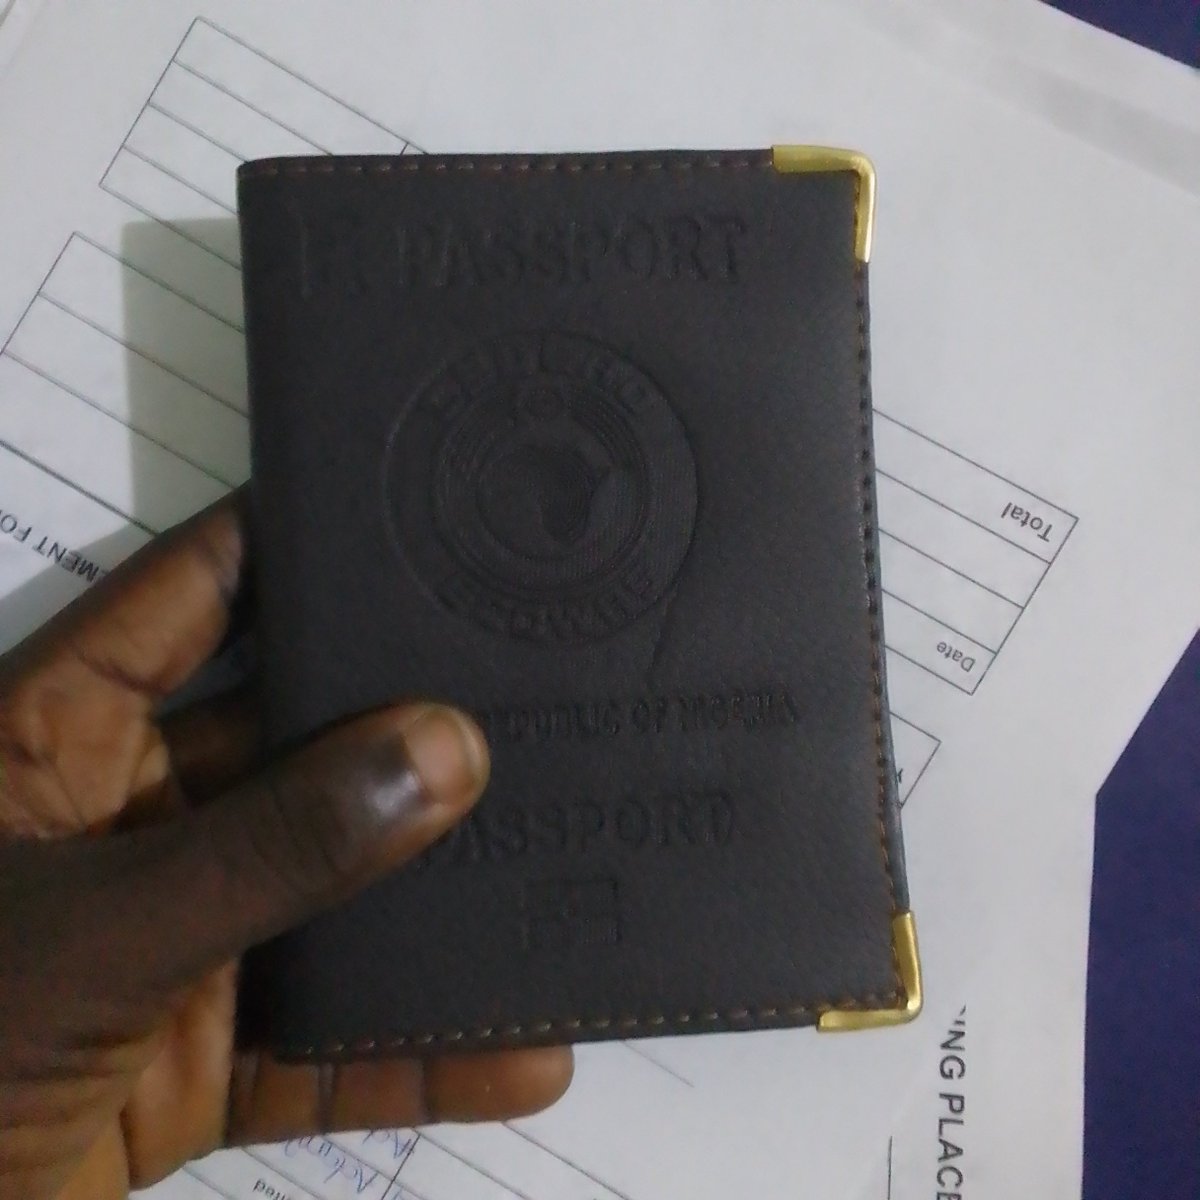 My experience with @nigimmigration oshogbo chapter
There is this mentality people have about those who reg for their passport online,that they won't attend to you and they won't process your passport,well I can say the system is better now than what you think @InsideOsogbo